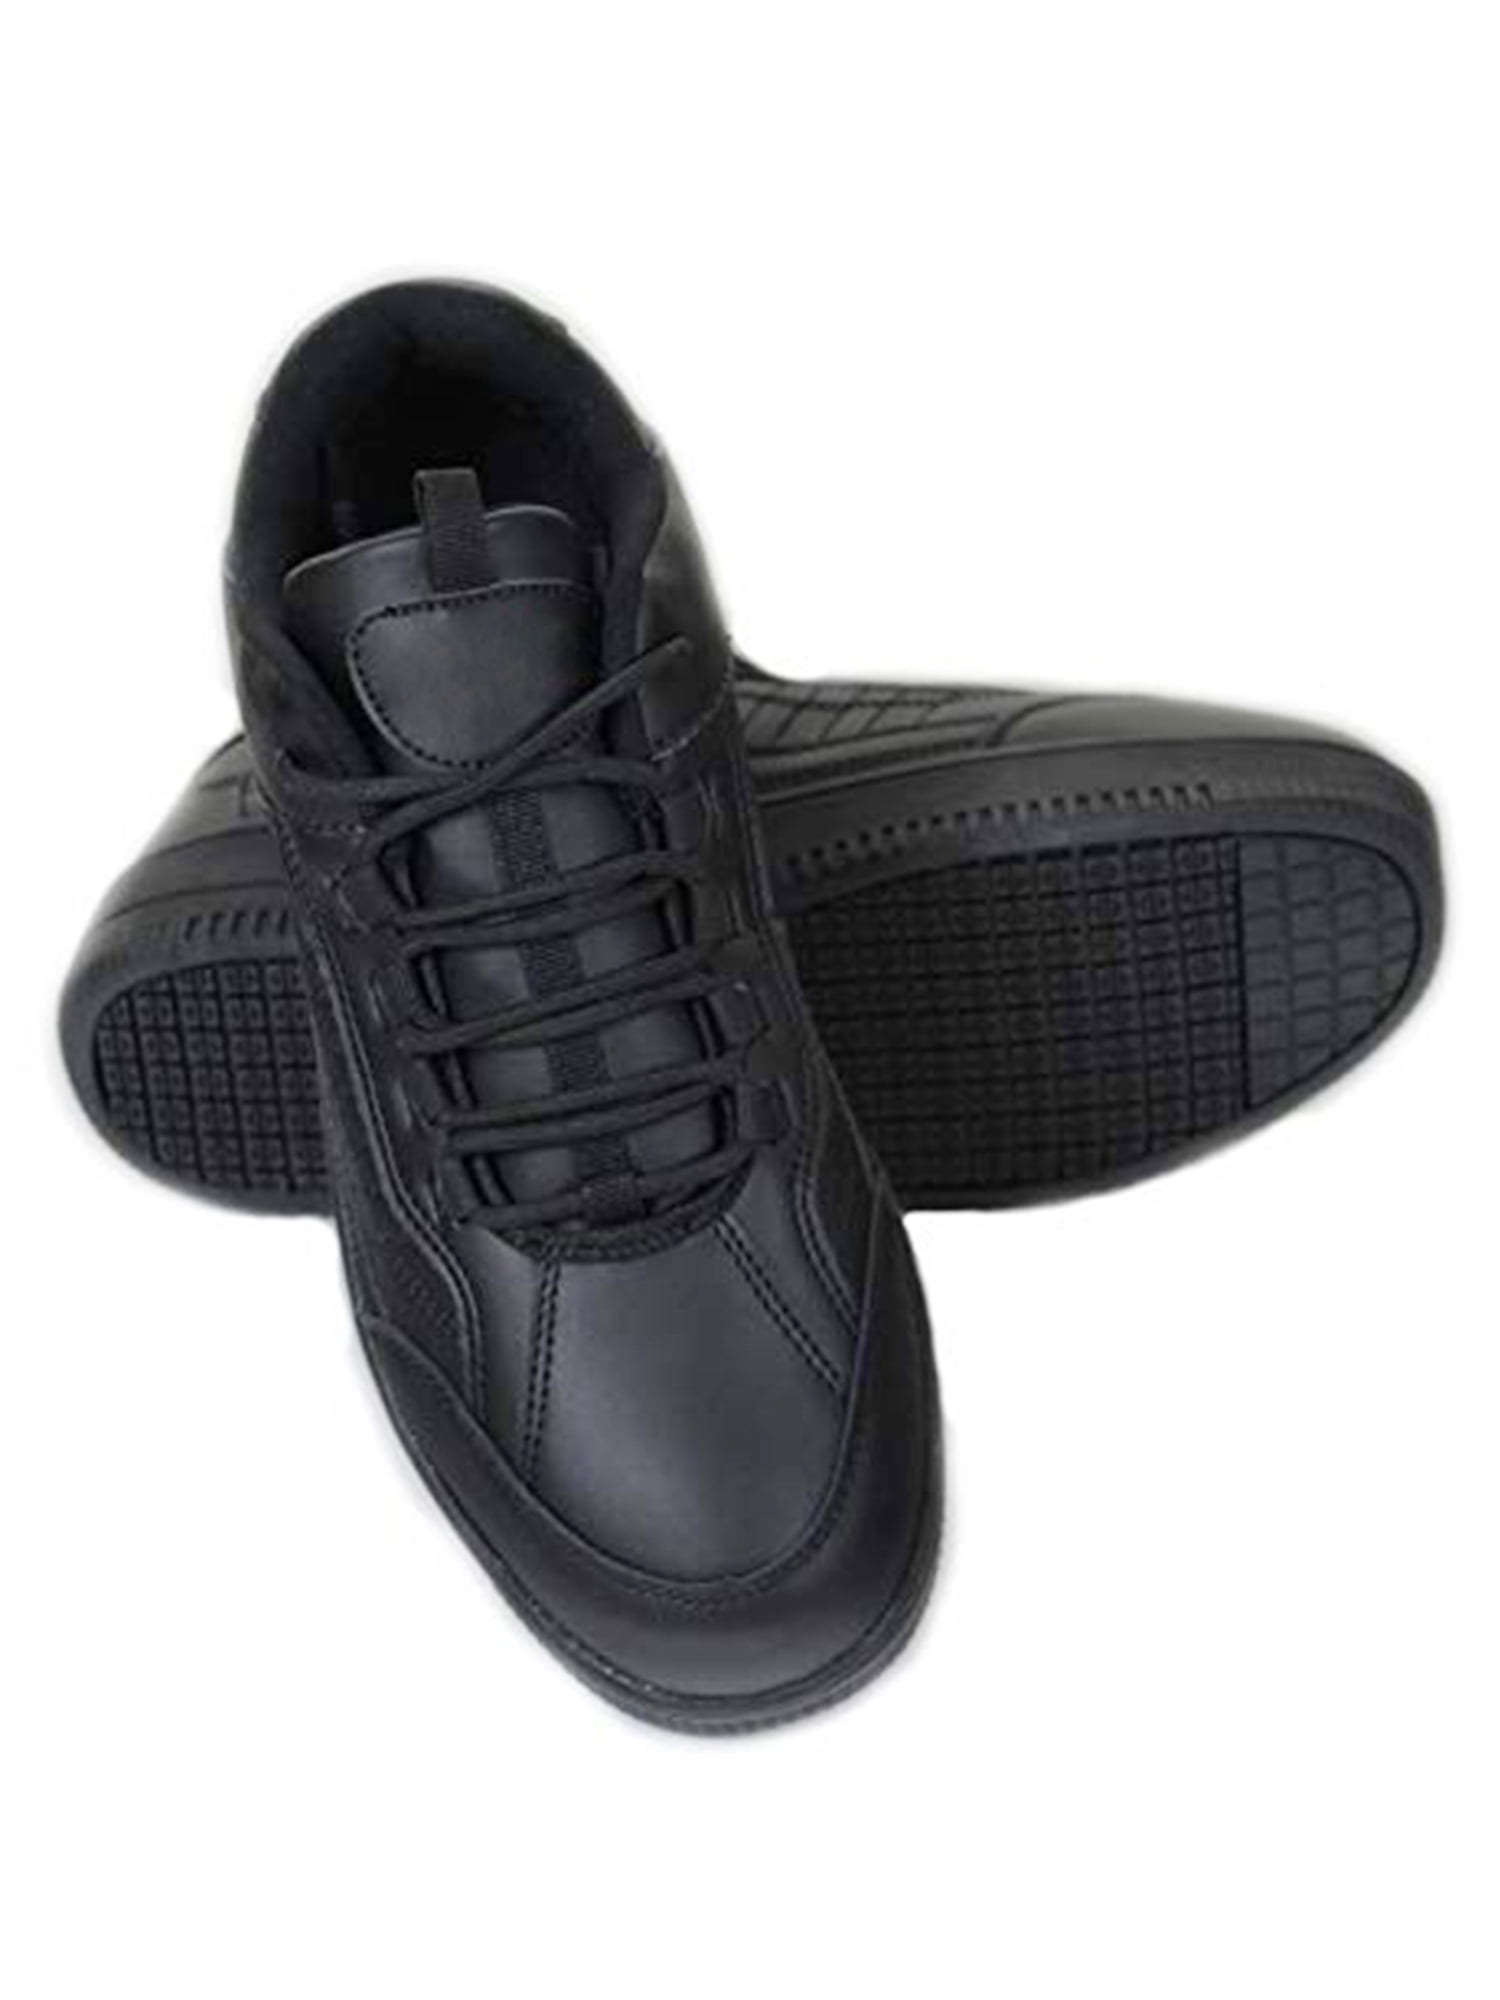 non slip and oil resistant shoes